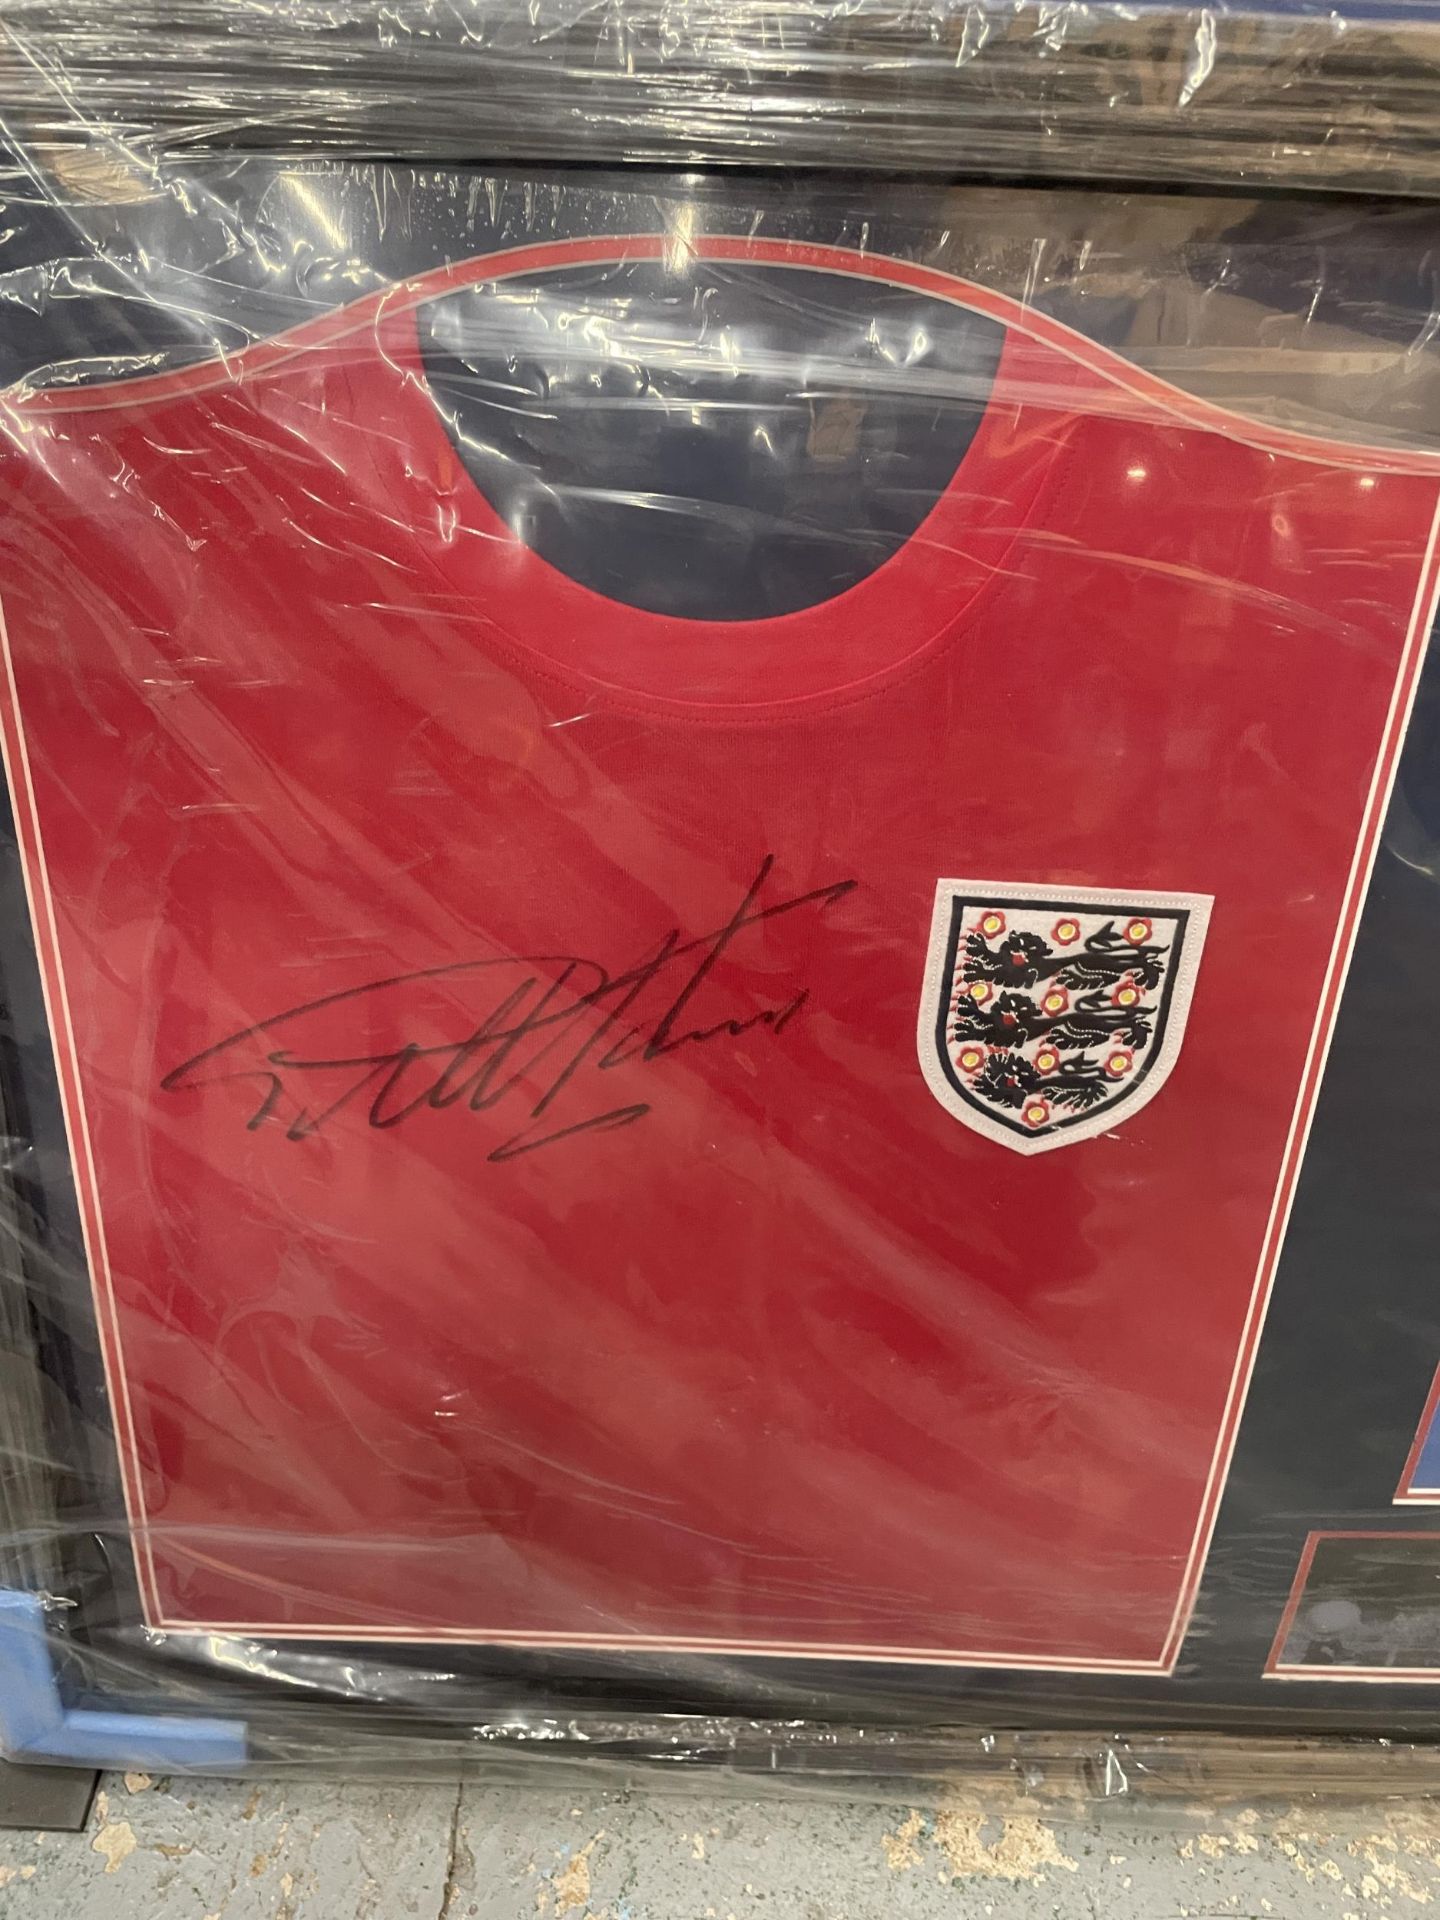 A FRAMED 1966 ENGLAND WORLD CUP MONTAGE, SIGNED SHIRT SIGNED BY GEOFF HURST, WITH ALL STAR - Image 2 of 6